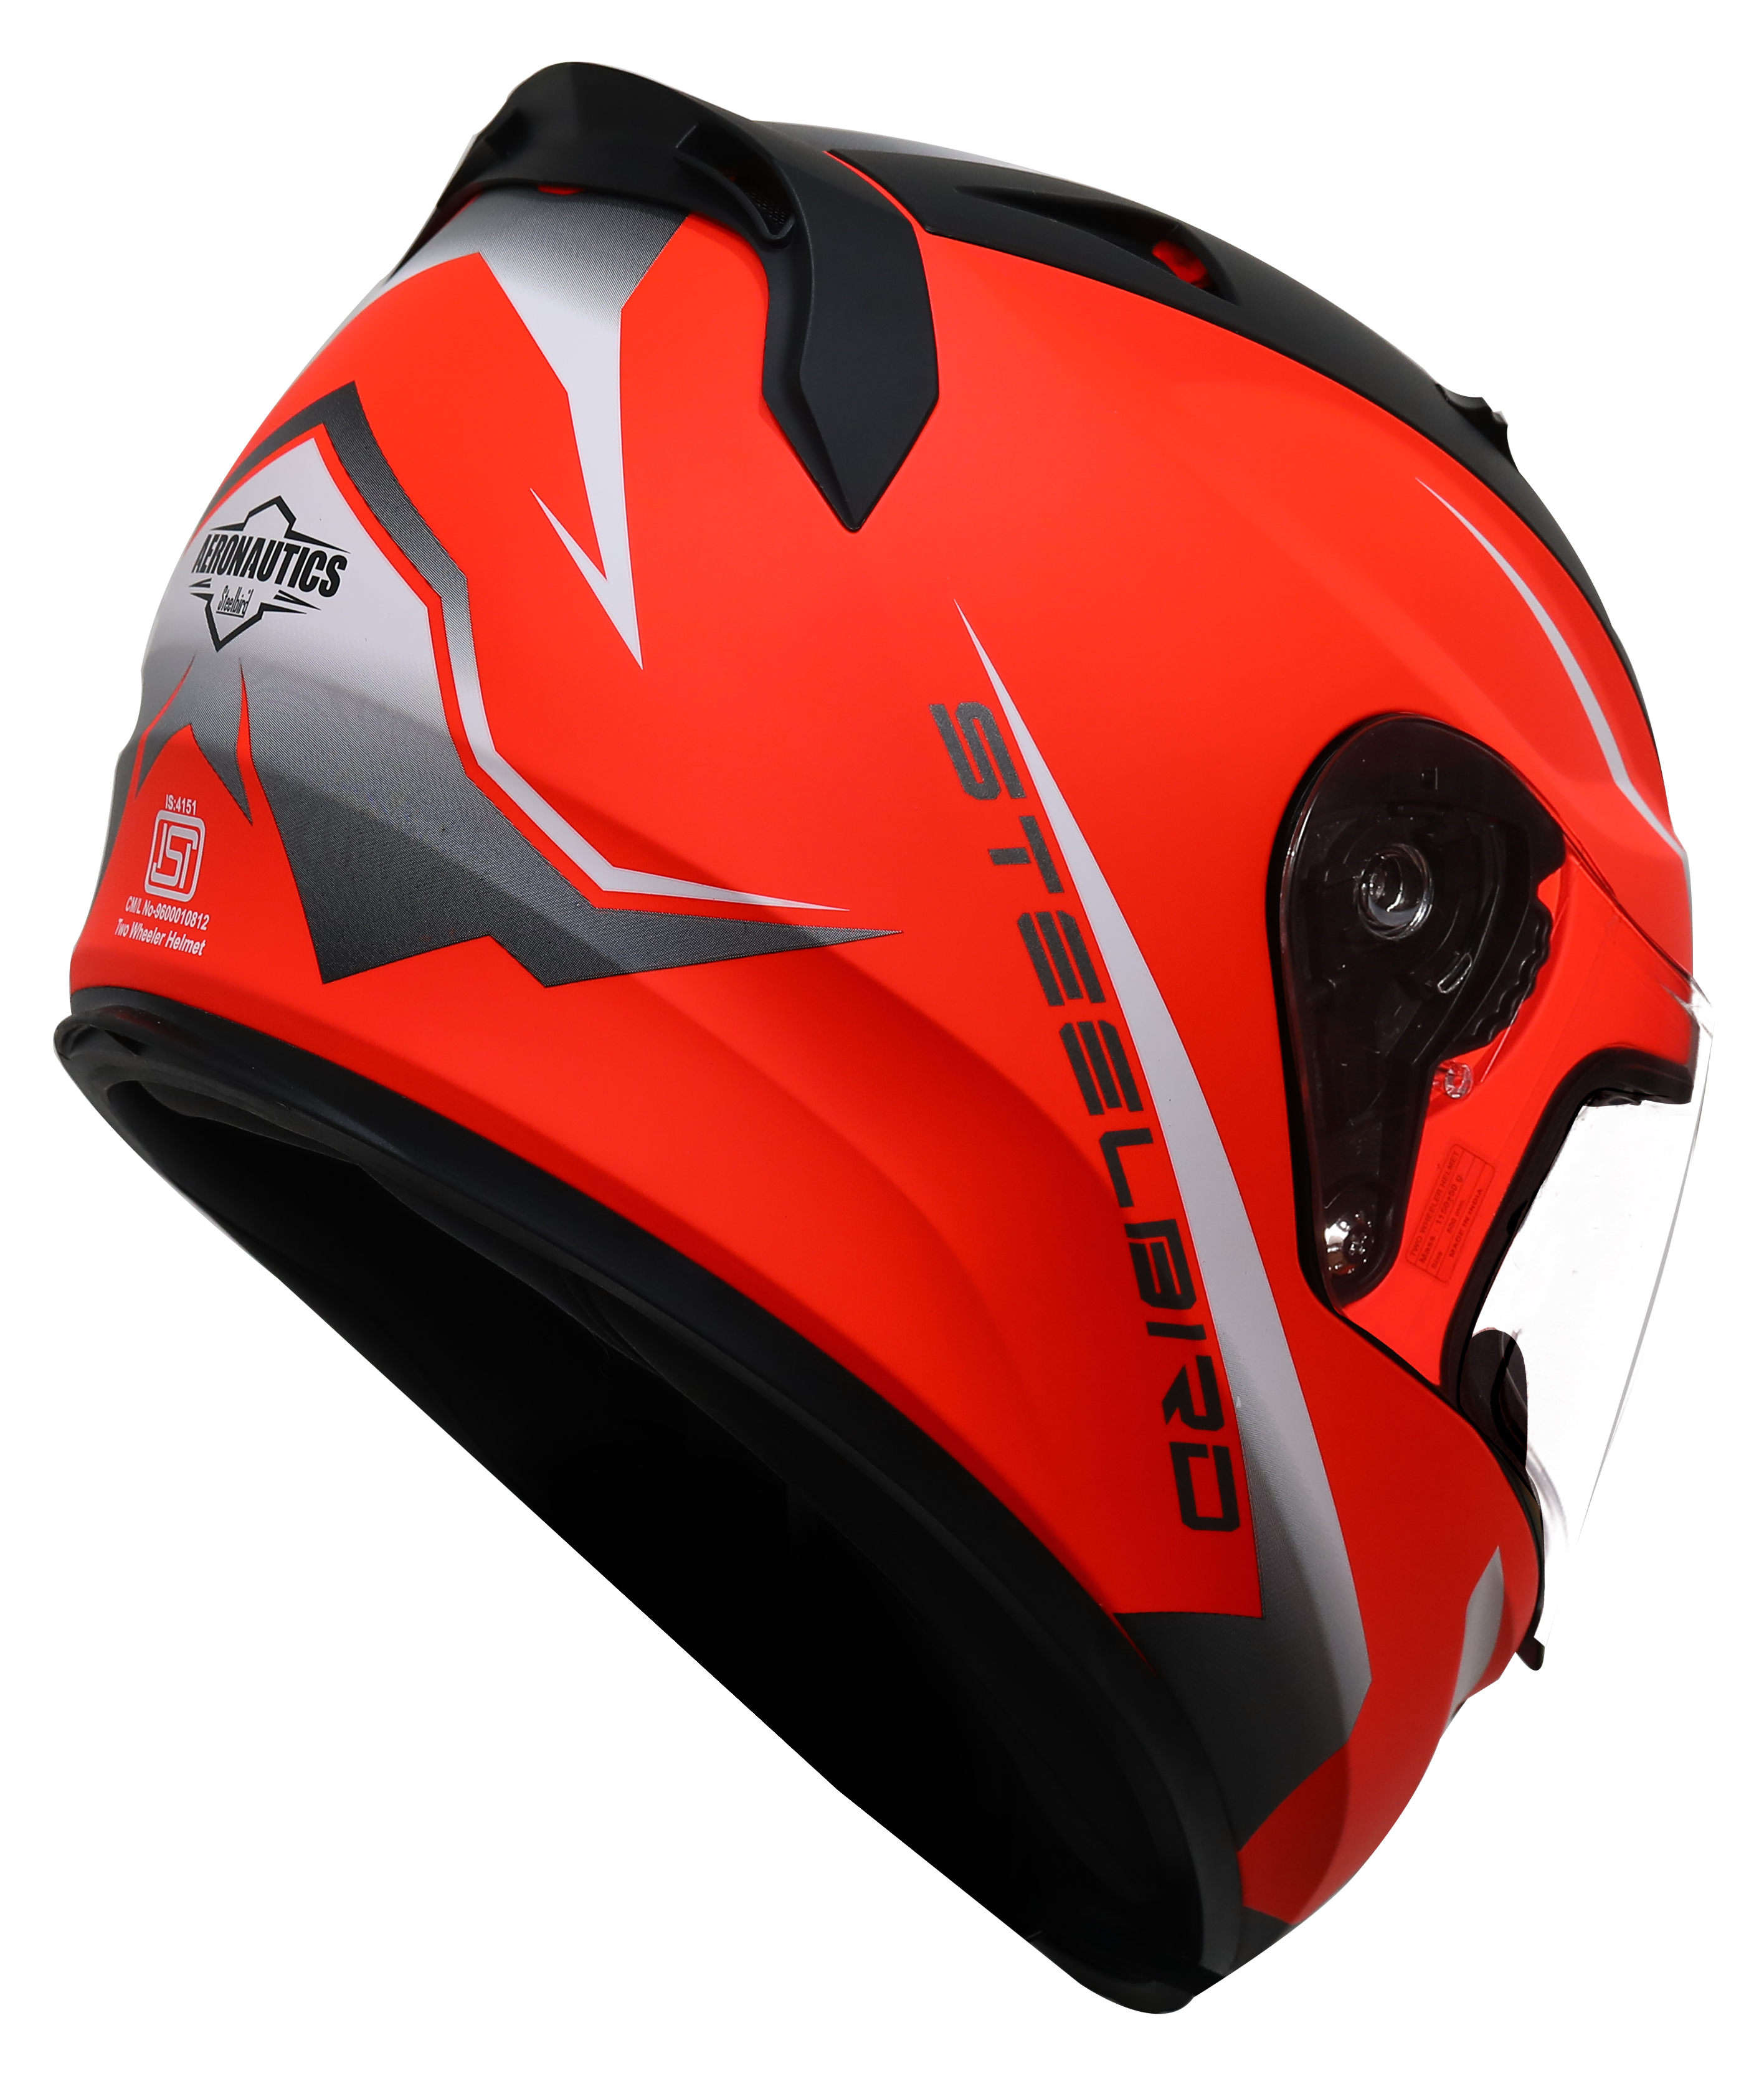 SA-1 WHIF GLOSSY FLUO RED WITH WHITE PHOTOCHROMIC VISOR